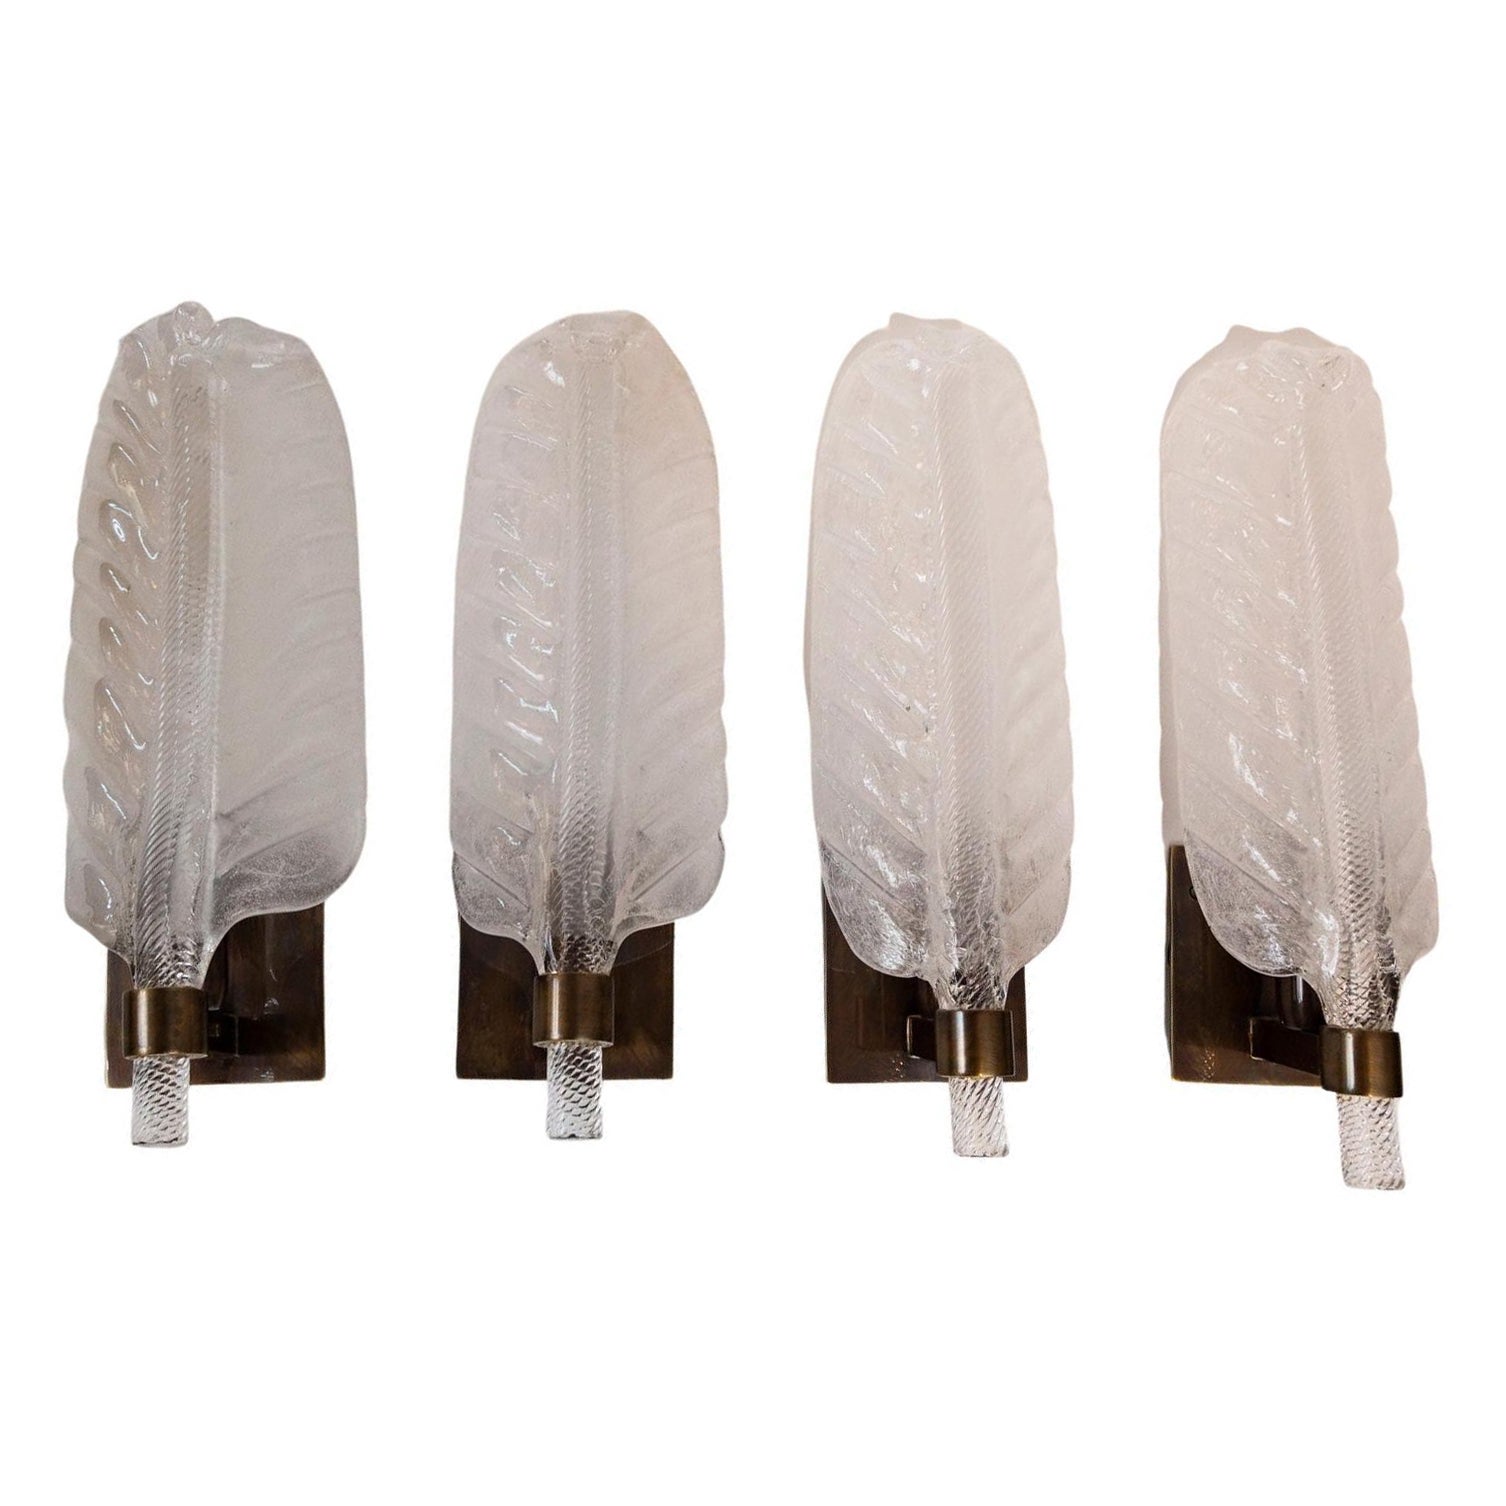 Set of 4 Blown Leaf Wall Lights, Contemporary, UL Certified